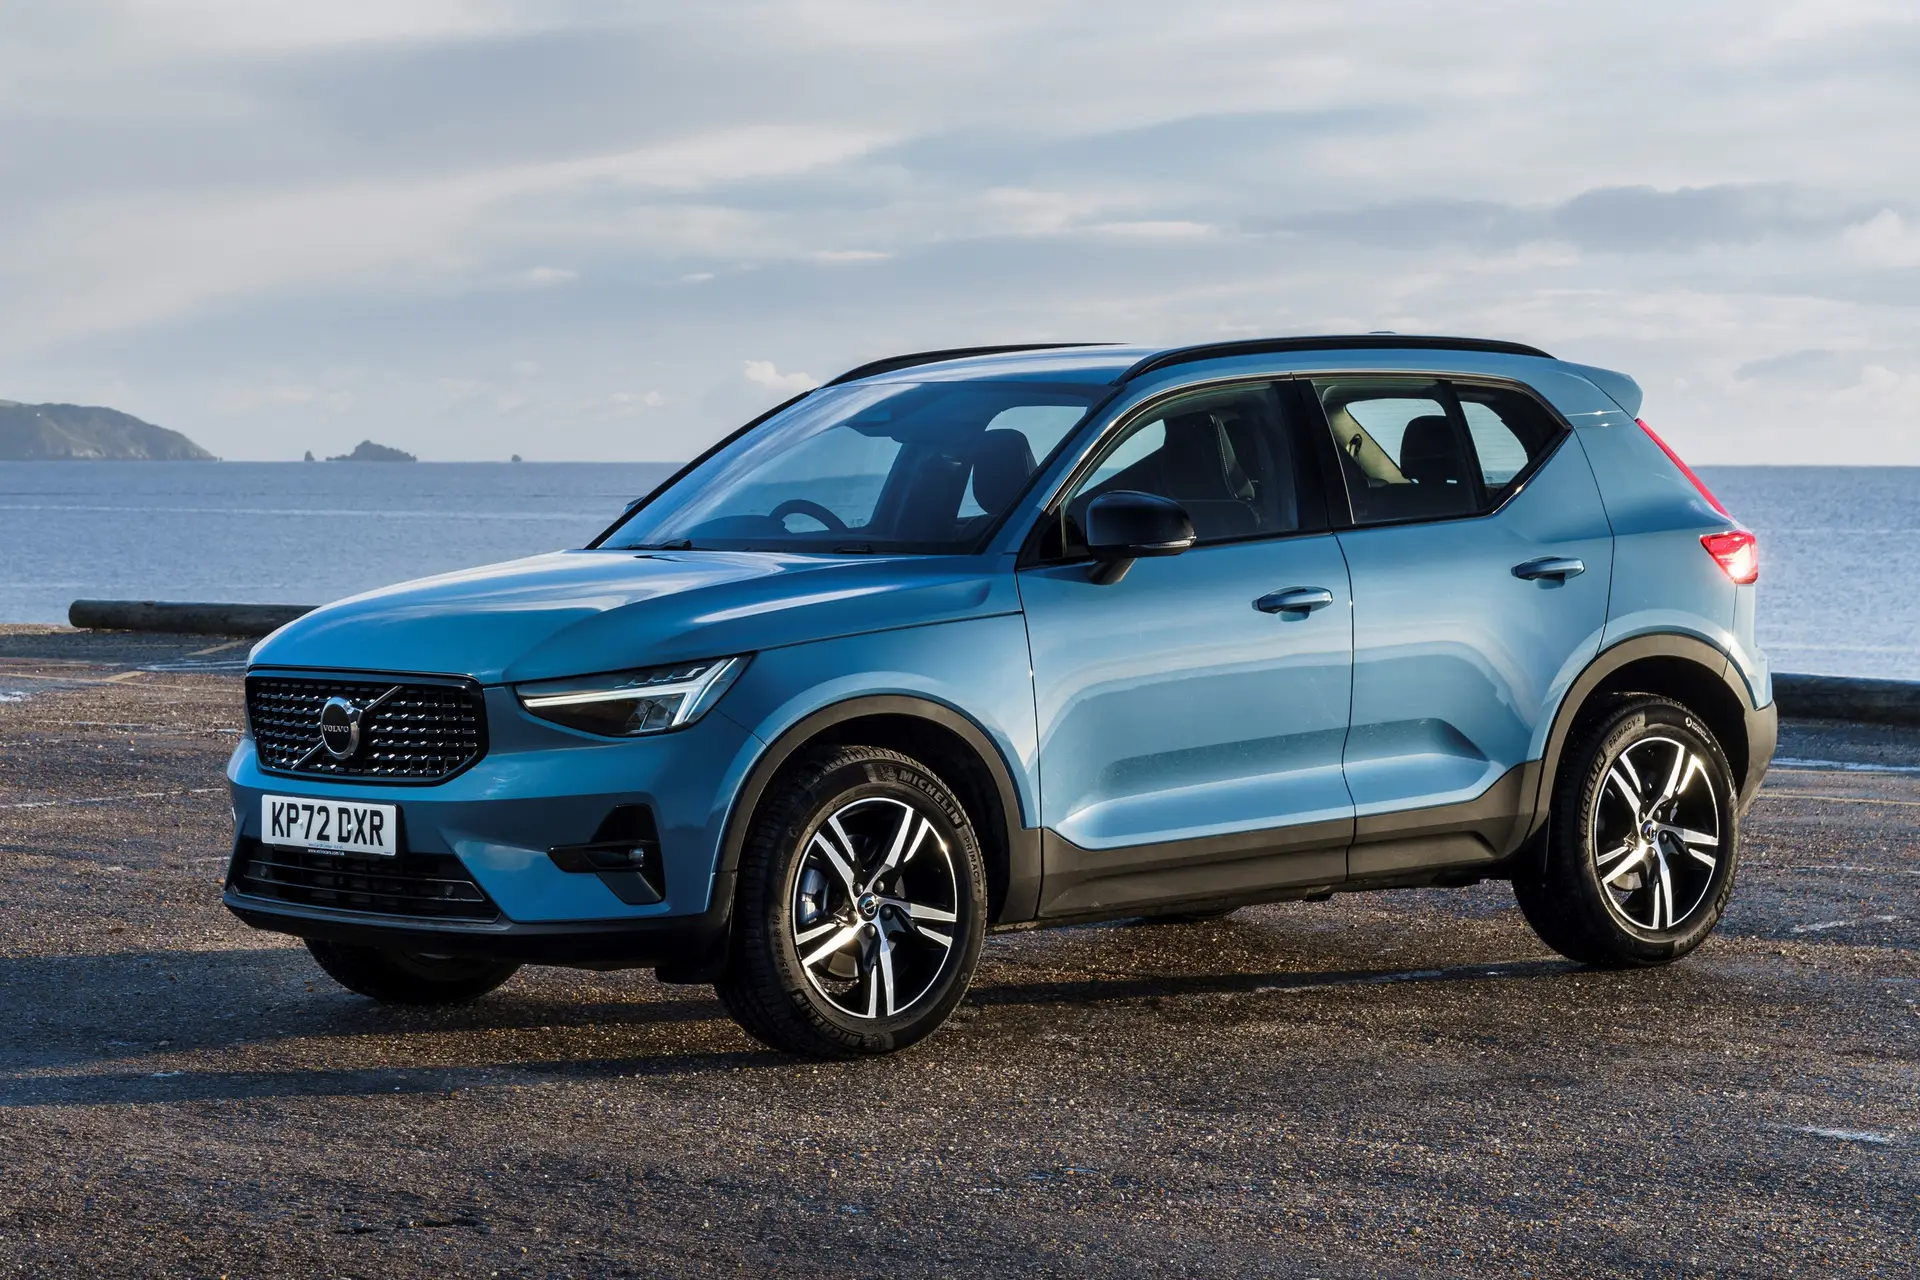 My Volvo XC40 ownership review: Ride, handling, mileage & other updates